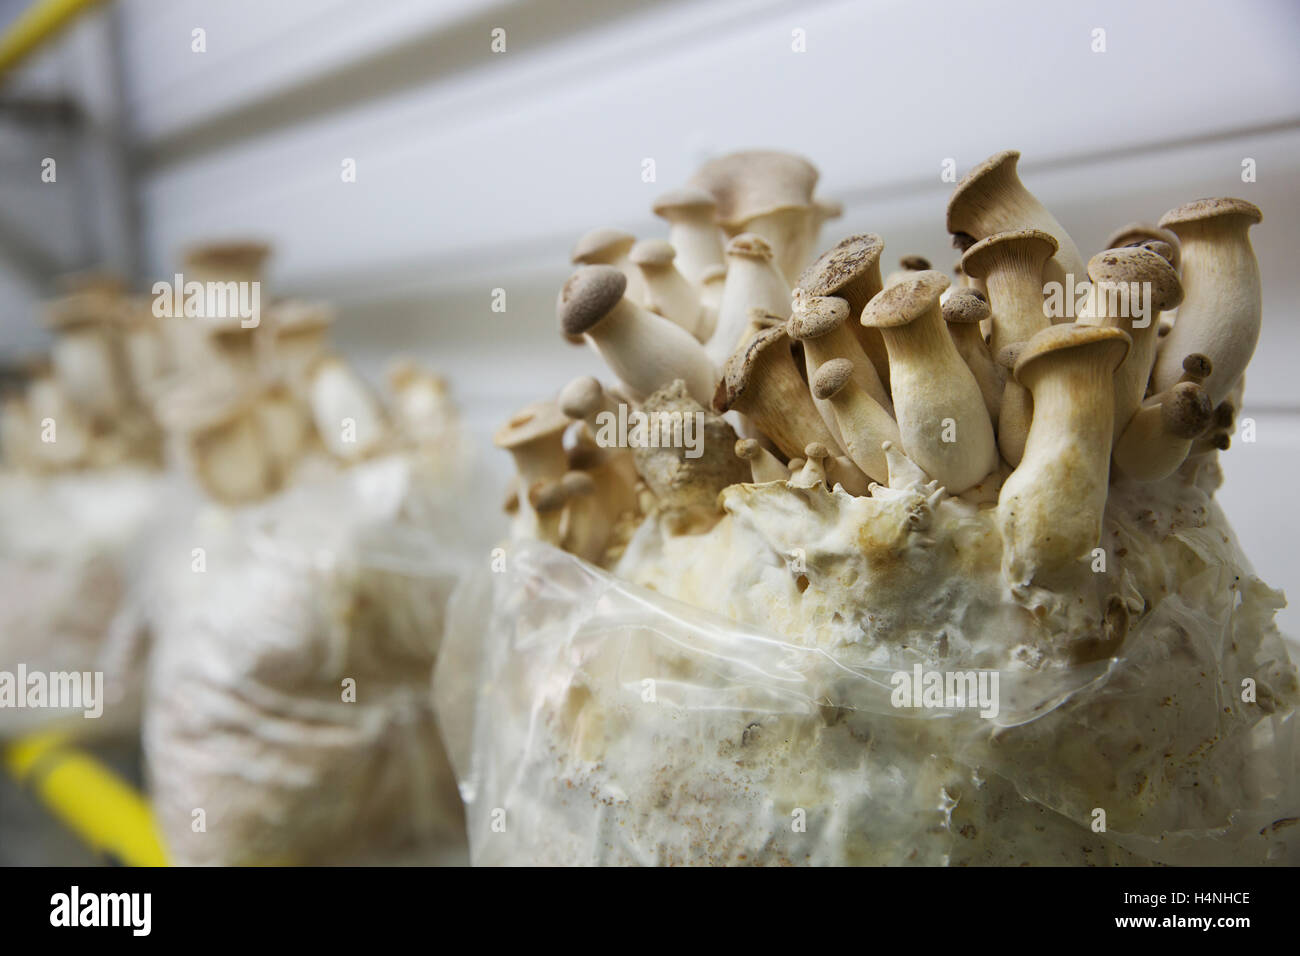 Close up of a bag of white mushrooms. Stock Photo